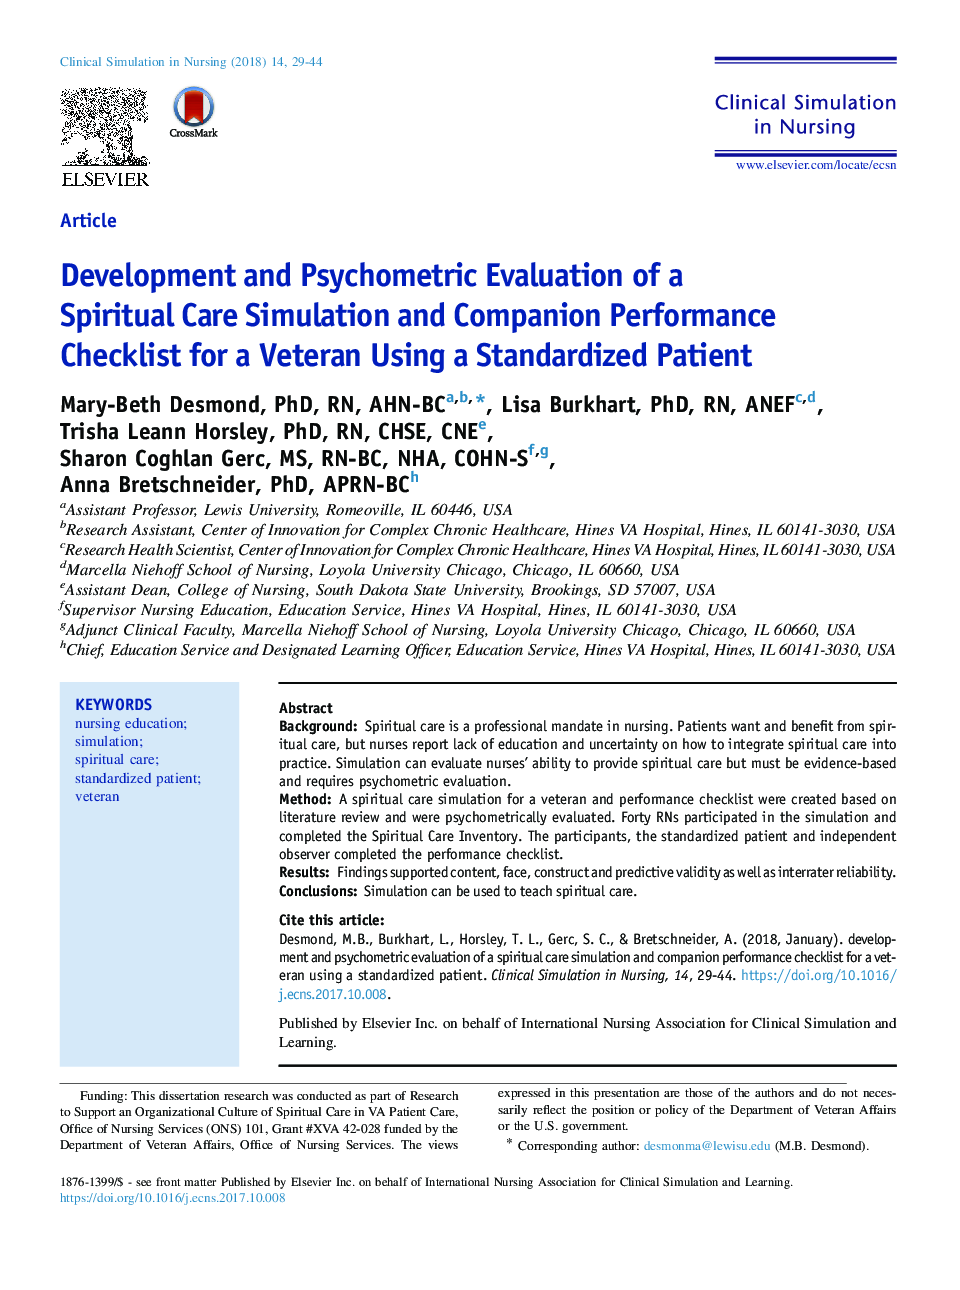 Development and Psychometric Evaluation of a Spiritual Care Simulation and Companion Performance Checklist for a Veteran Using a Standardized Patient